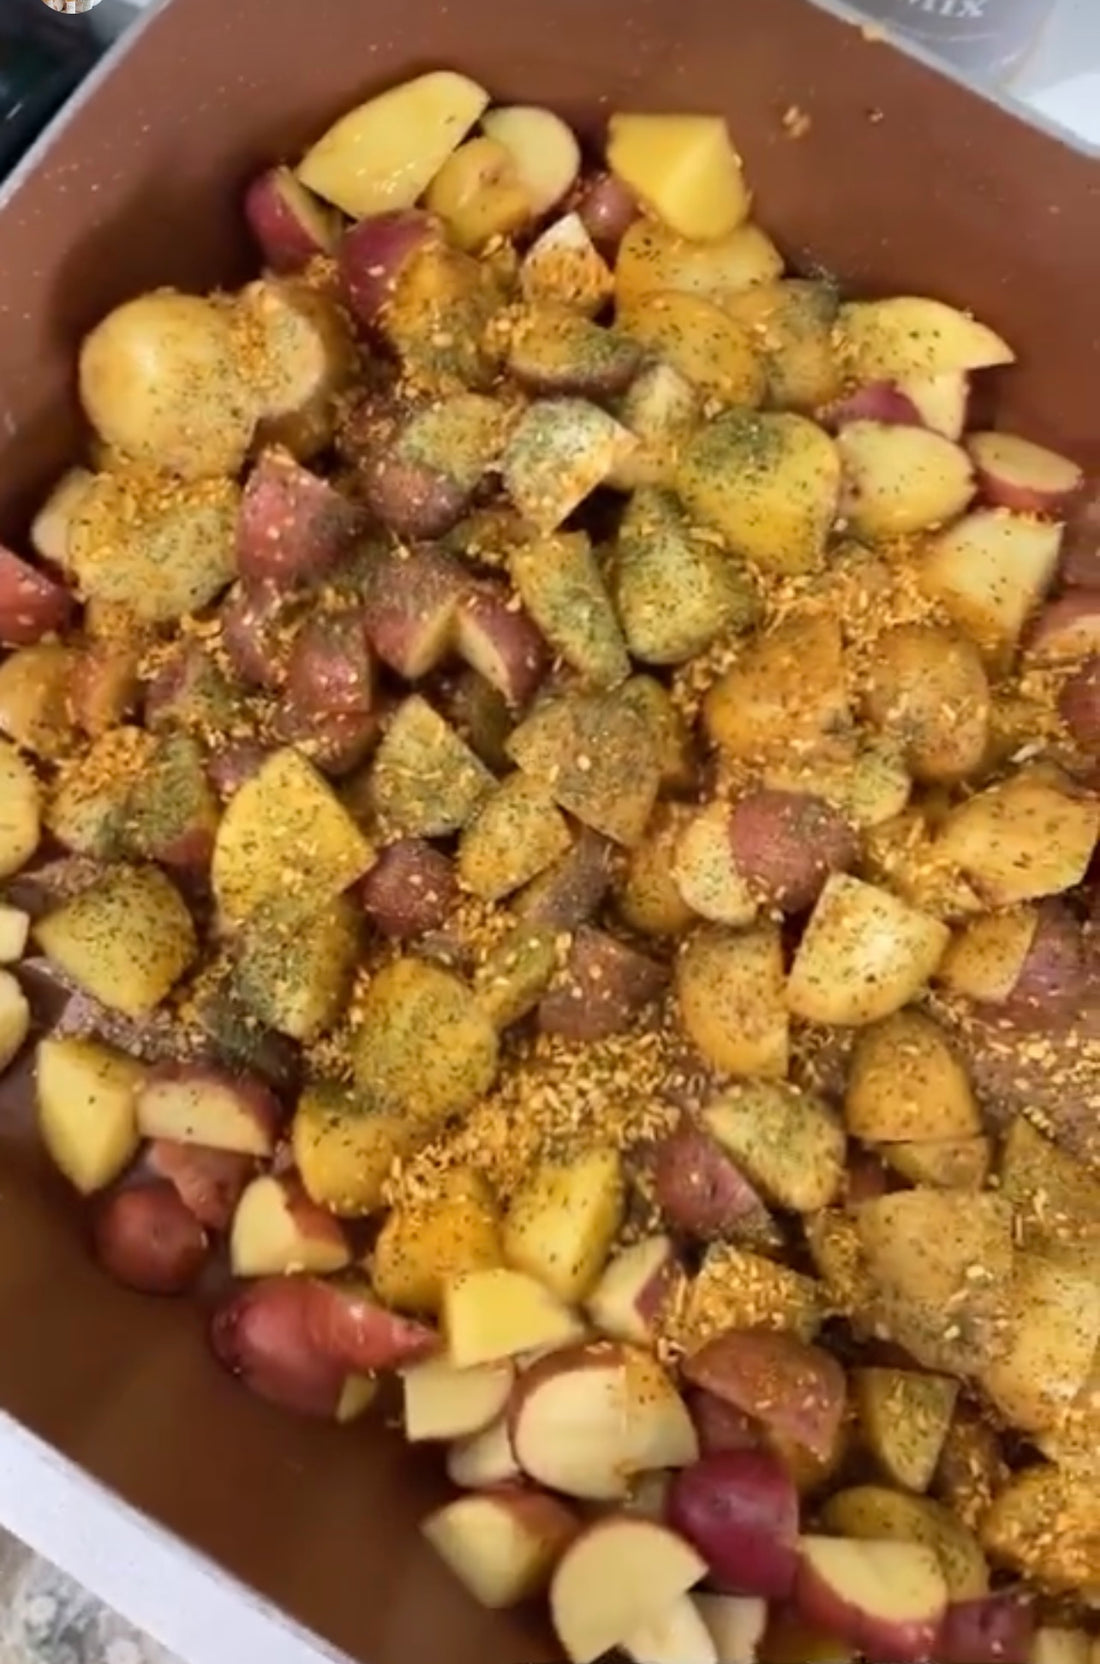 Roasted Potatoes with my Onion Mix & Ranch Seasoning